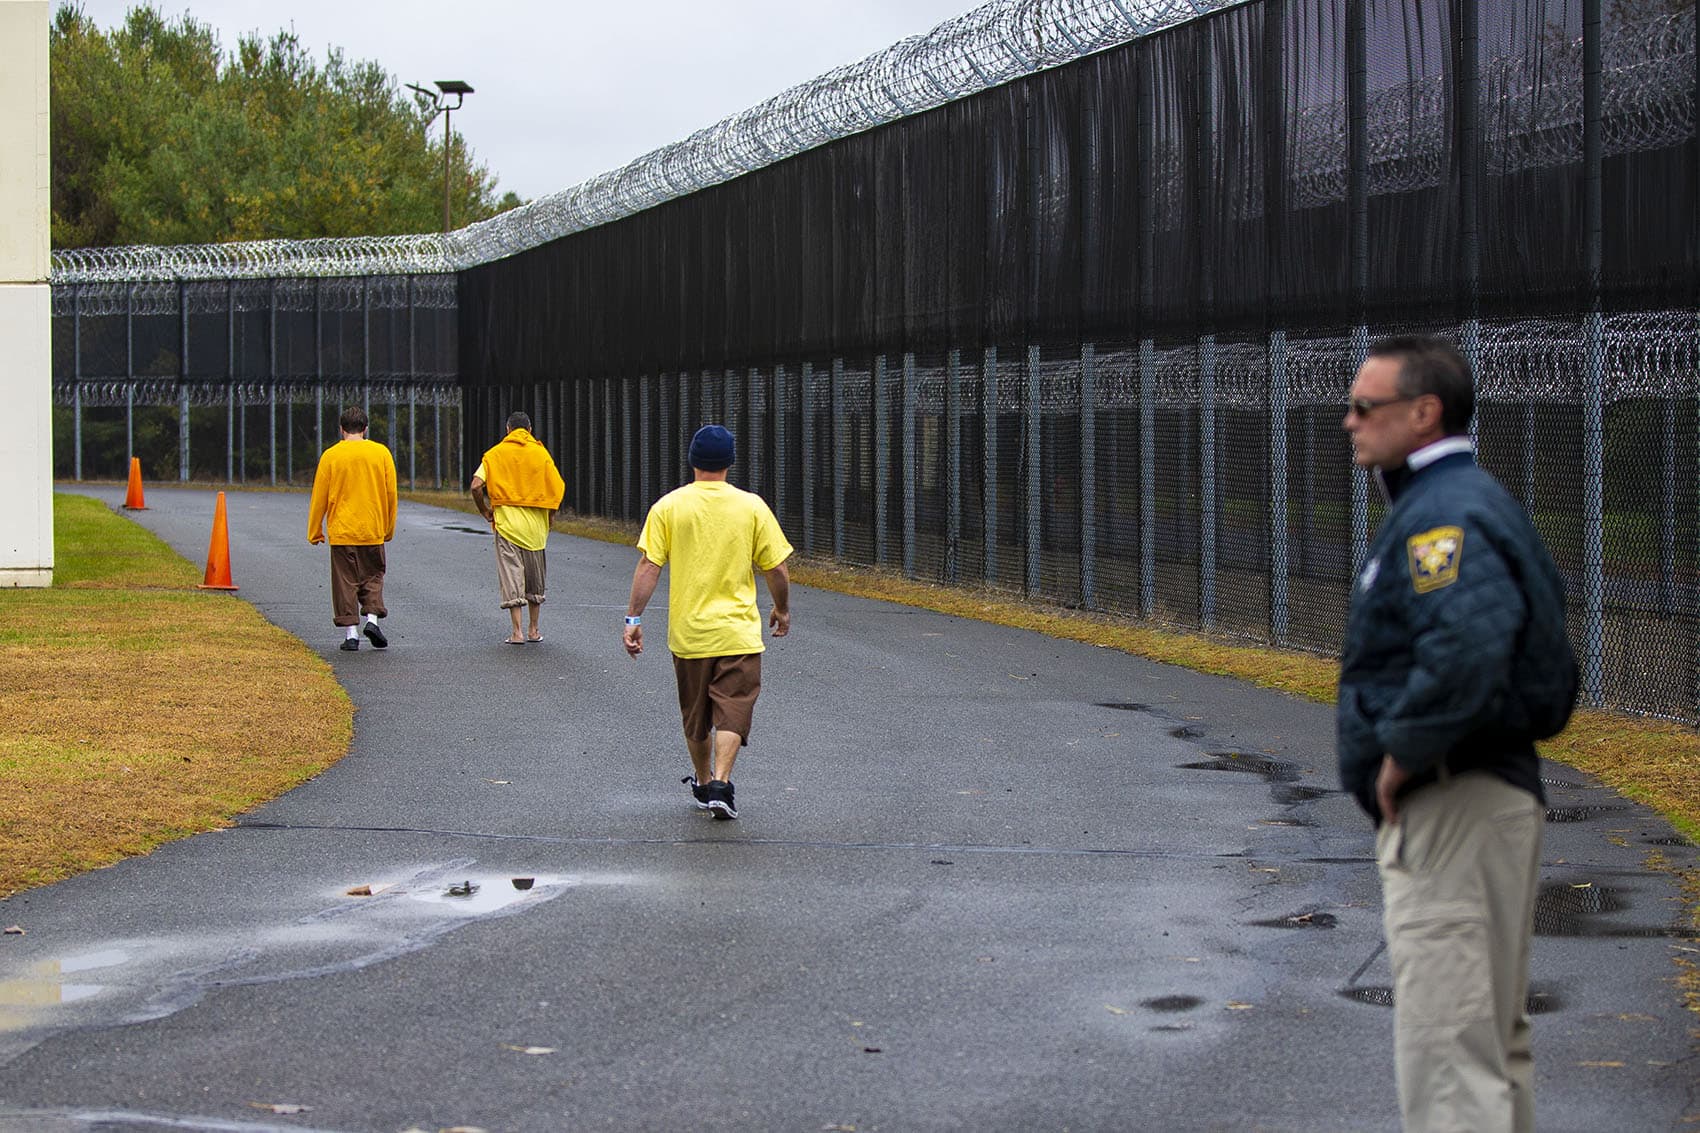 Men who have been civilly committed to the addiction treatment unit at the Hampden County Jail in Ludlow walk around a fenced-in path to get some exercise. (Jesse Costa/WBUR)